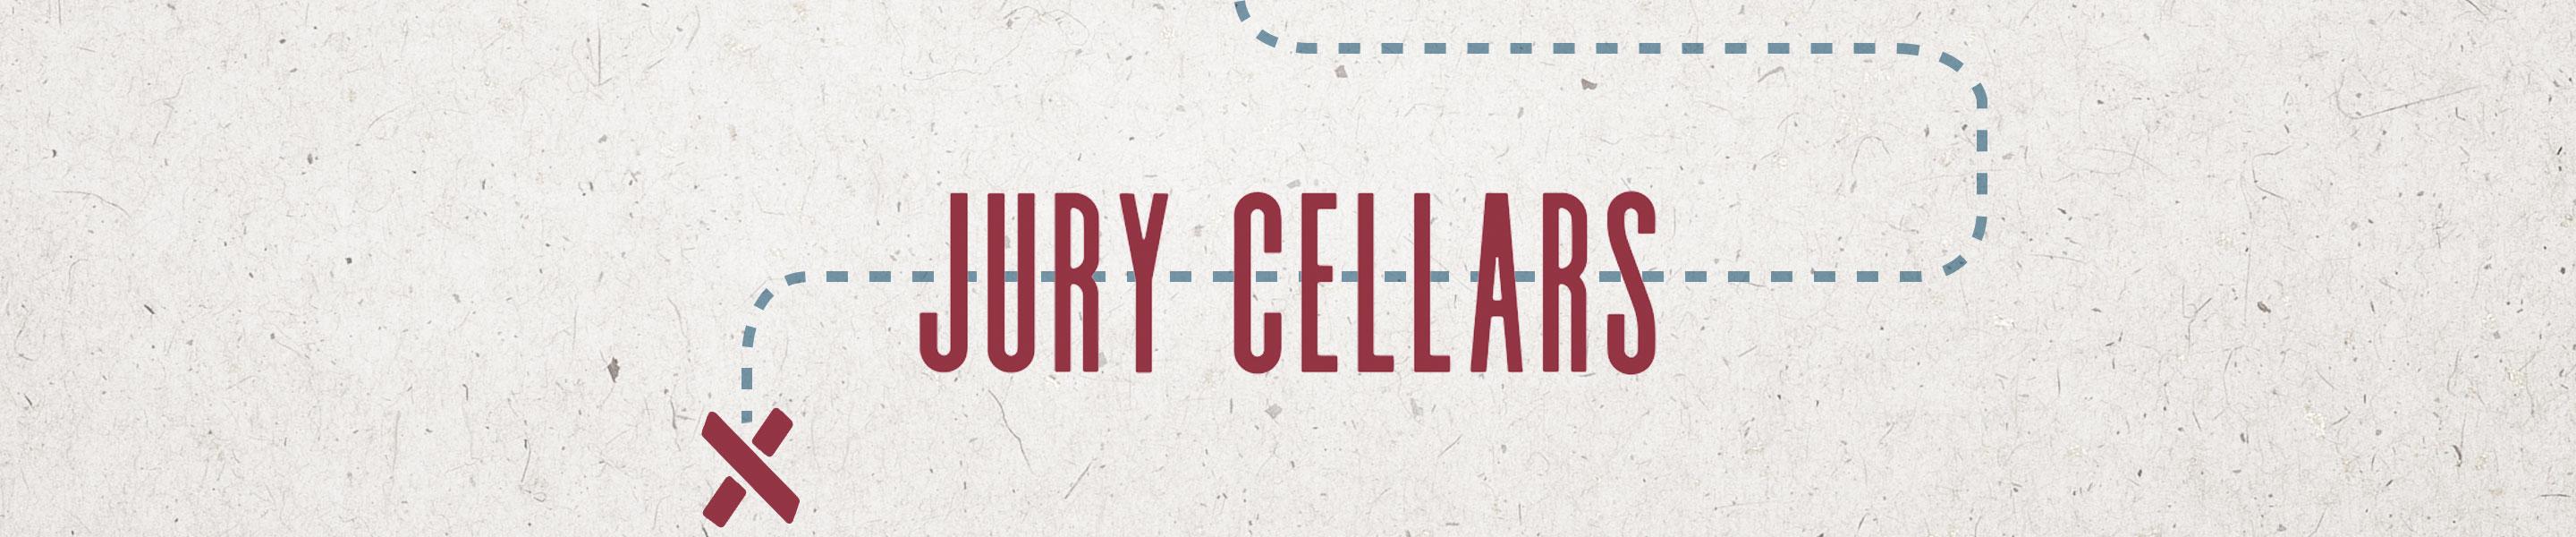 Jury Cellars was born from our one steadfast conviction—“make wines that people love to drink.” We’re in a good position to act on our principals, having cultivated a network of vineyard partnerships that are key to the creation of our nuanced wines. Our winemaker works judiciously to harmonize the terroir of premium vineyard blocks with expressive winemaking techniques. The result? Truly memorable, easy-drinking wines of exceptional quality. Are all wines created equal? We think not. Put our wine on trial yourself. After just one sip we do believe that you, your friends and family will deliver a unanimous verdict—that we are guilty of creating irresistible wine!